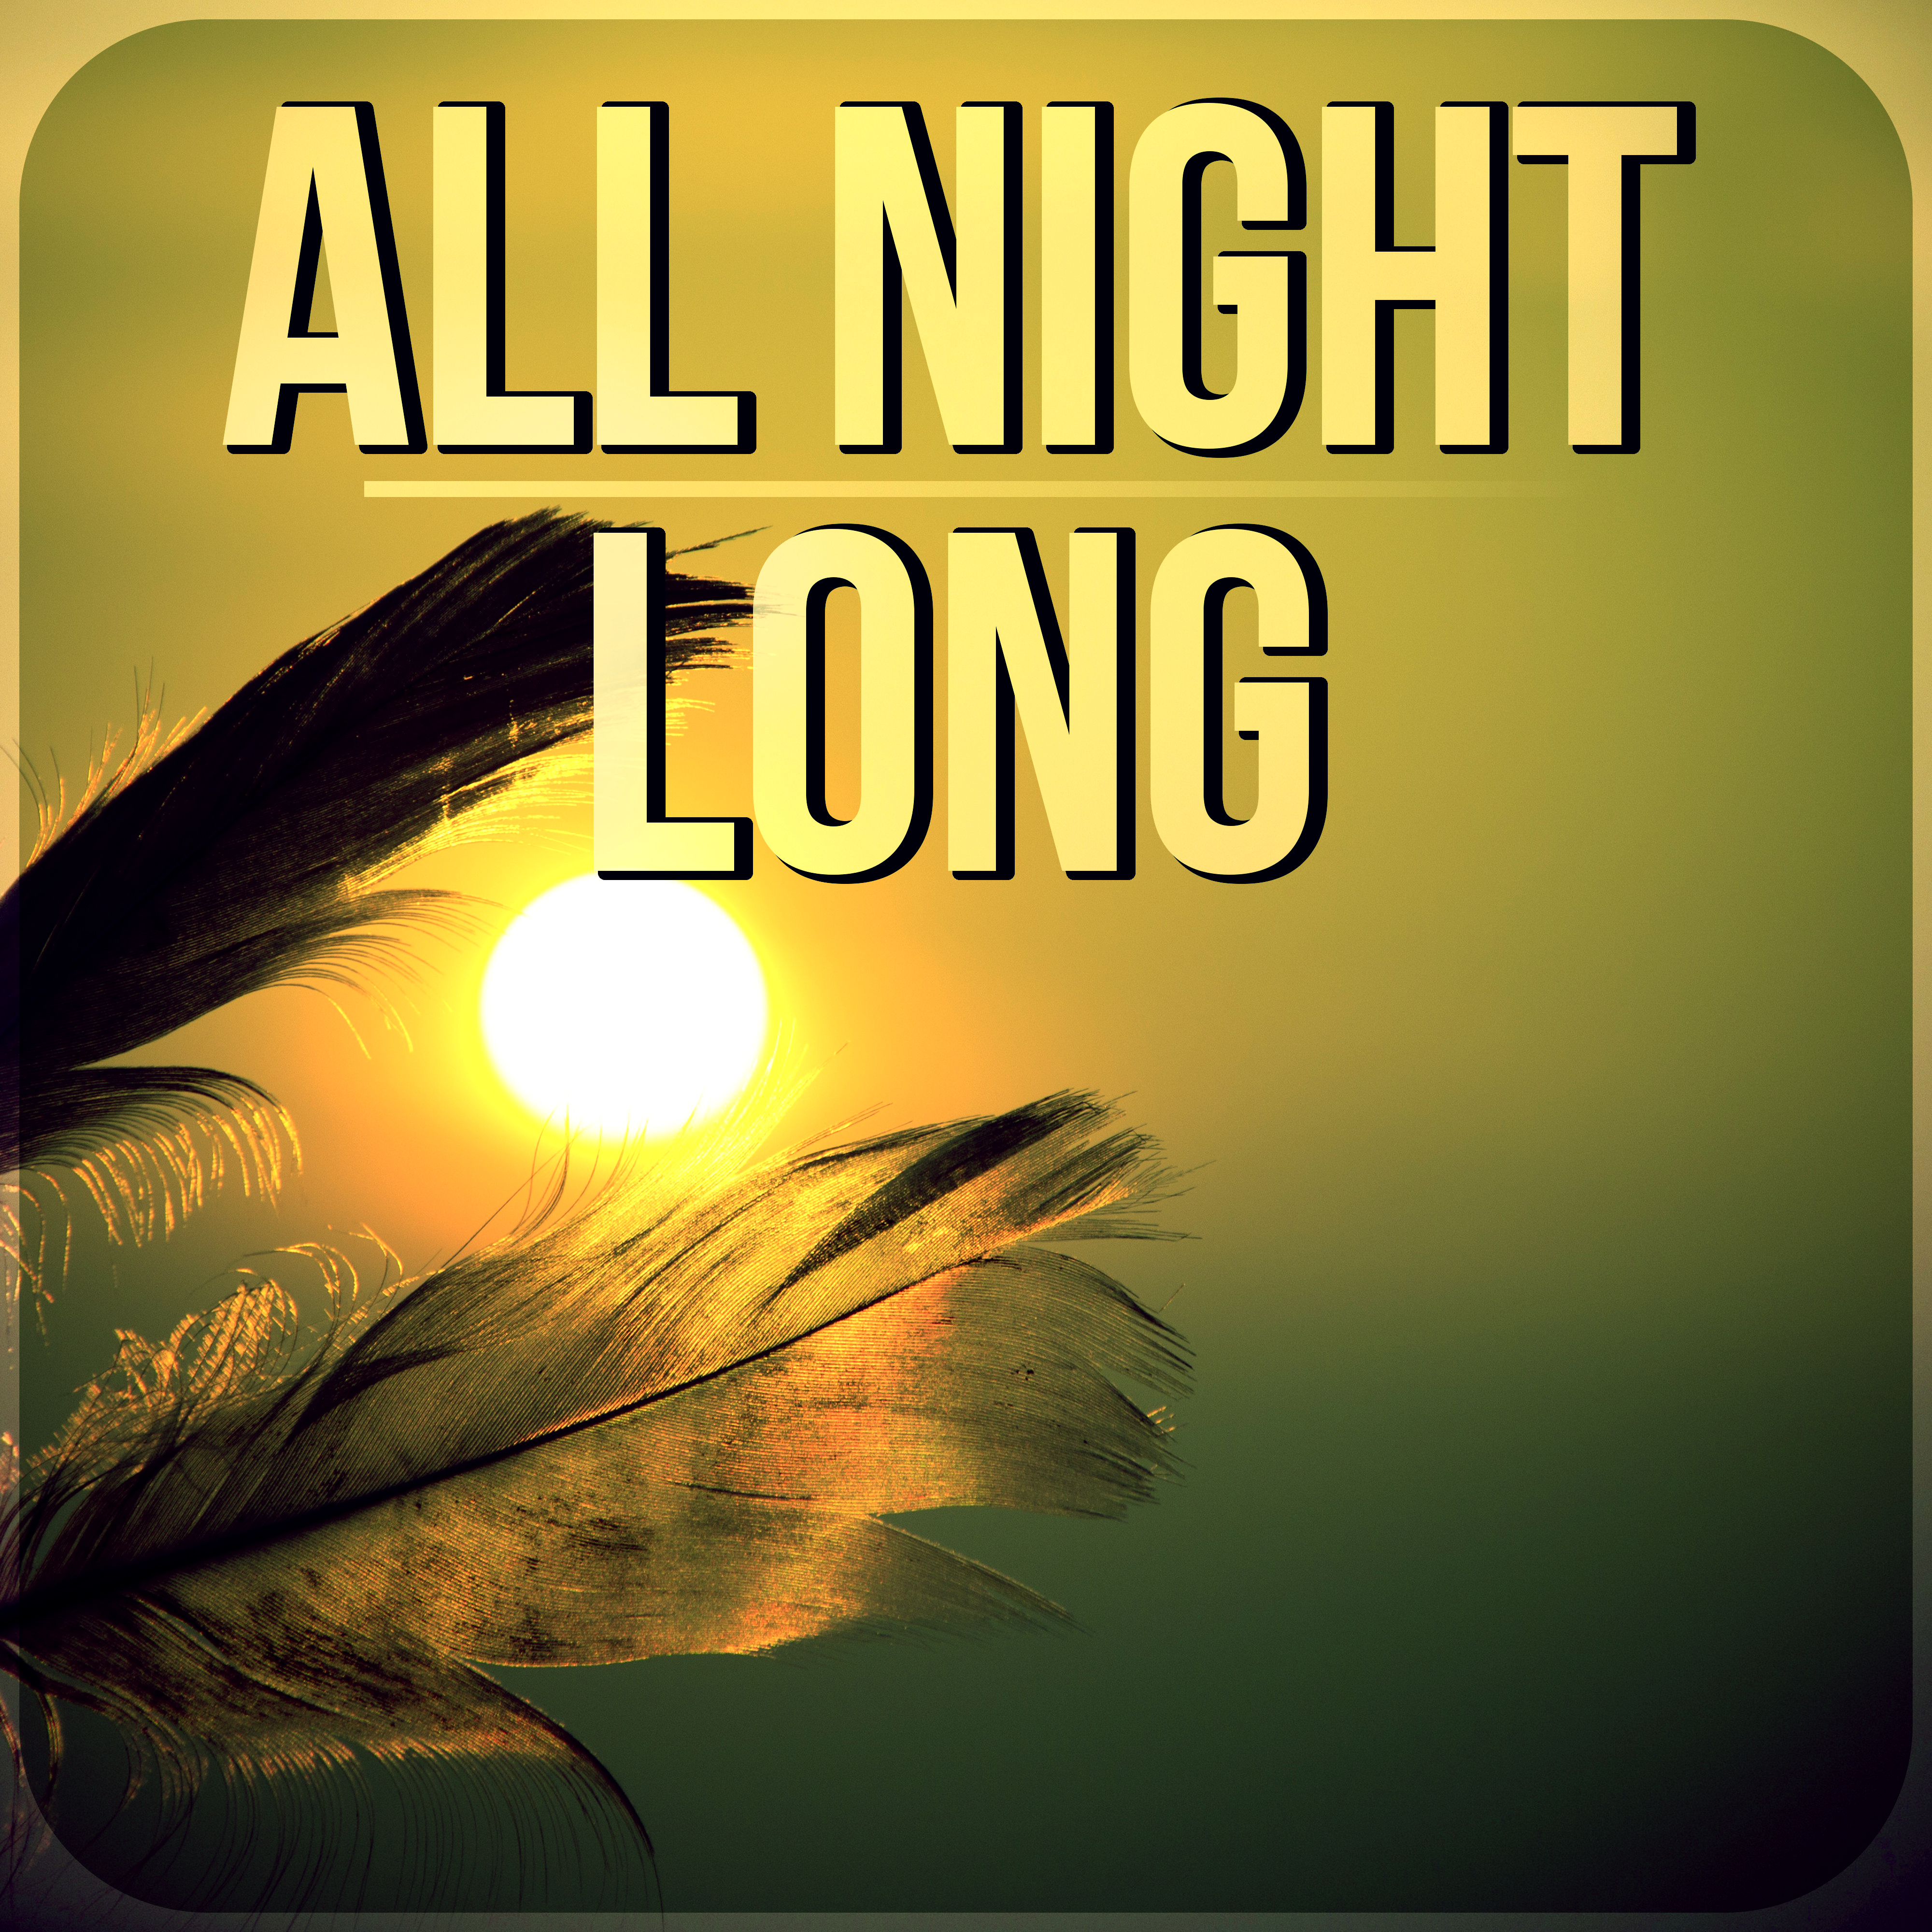 All Night Long - Relaxing Sounds and Long Sleeping Songs to Help You Relax at Night, Massage Therapy & Relaxation